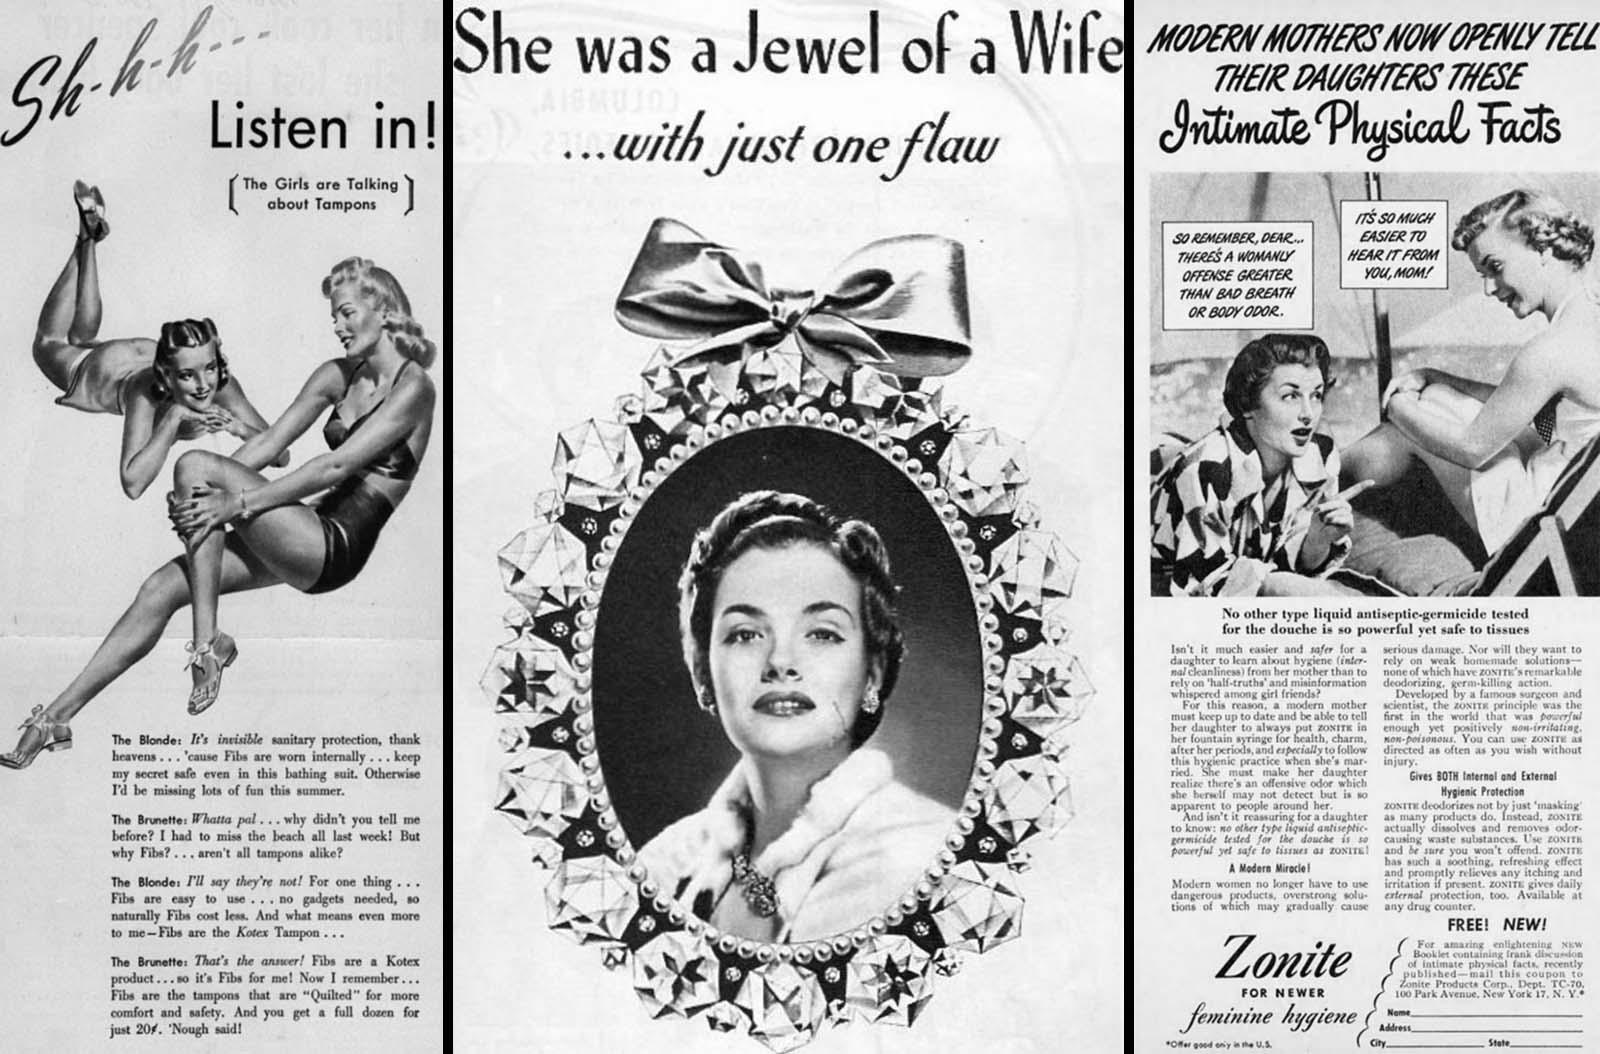 Curious and Hilarious Vintage Feminine Hygiene Ads From the Early 20th Century